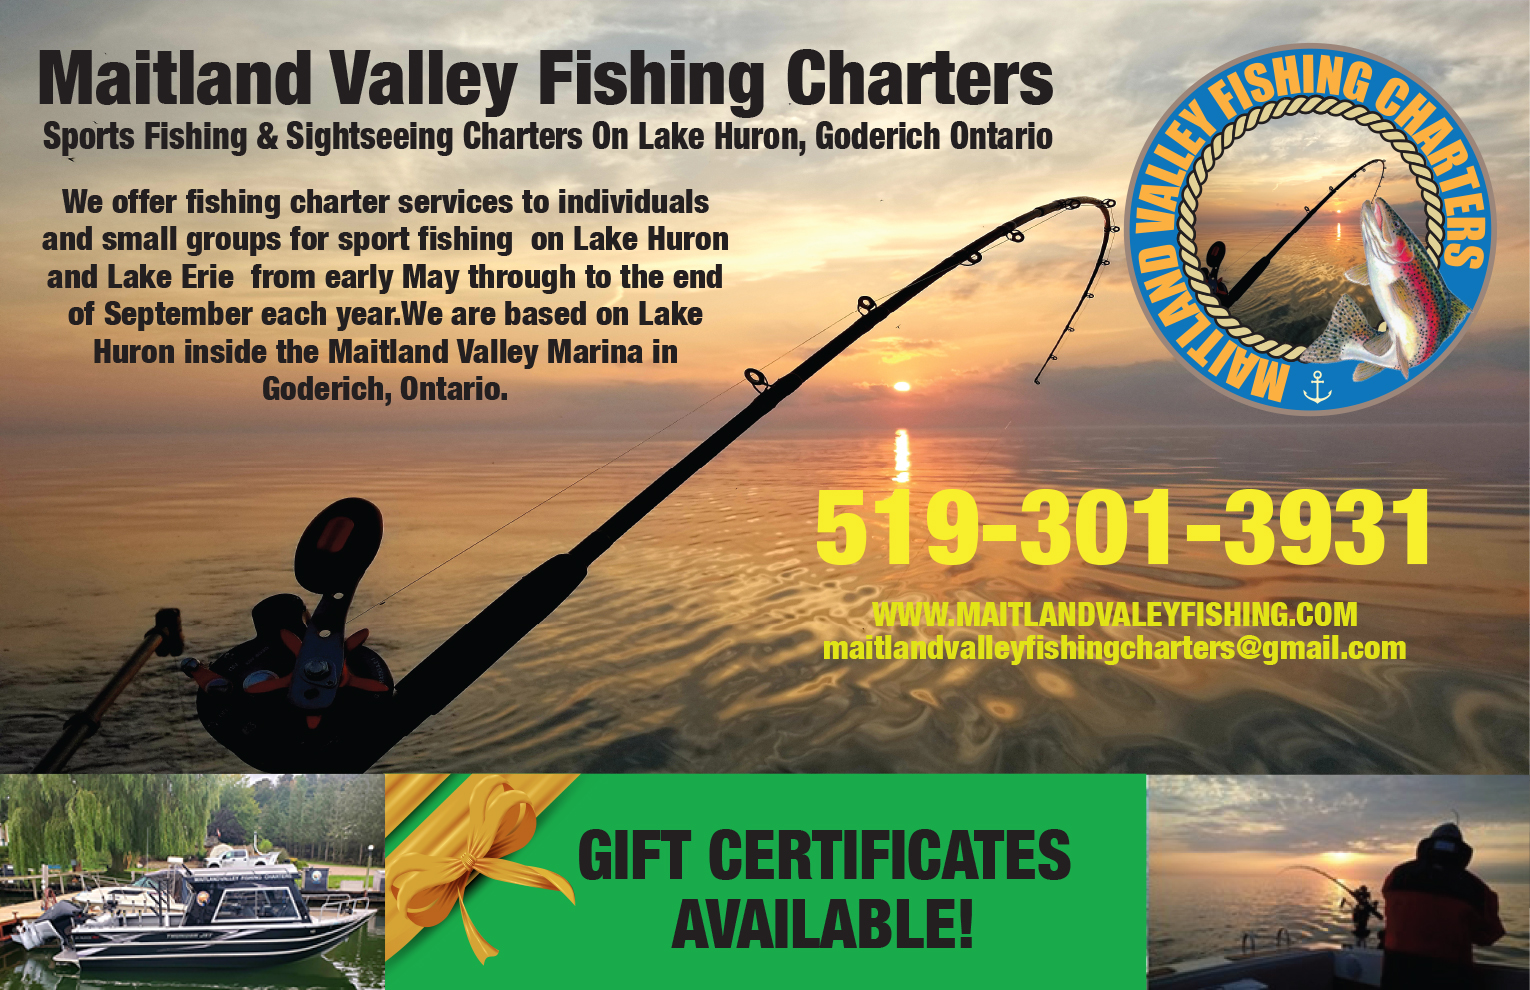 Fishing Charters - Maitland Valley Fishing Charters